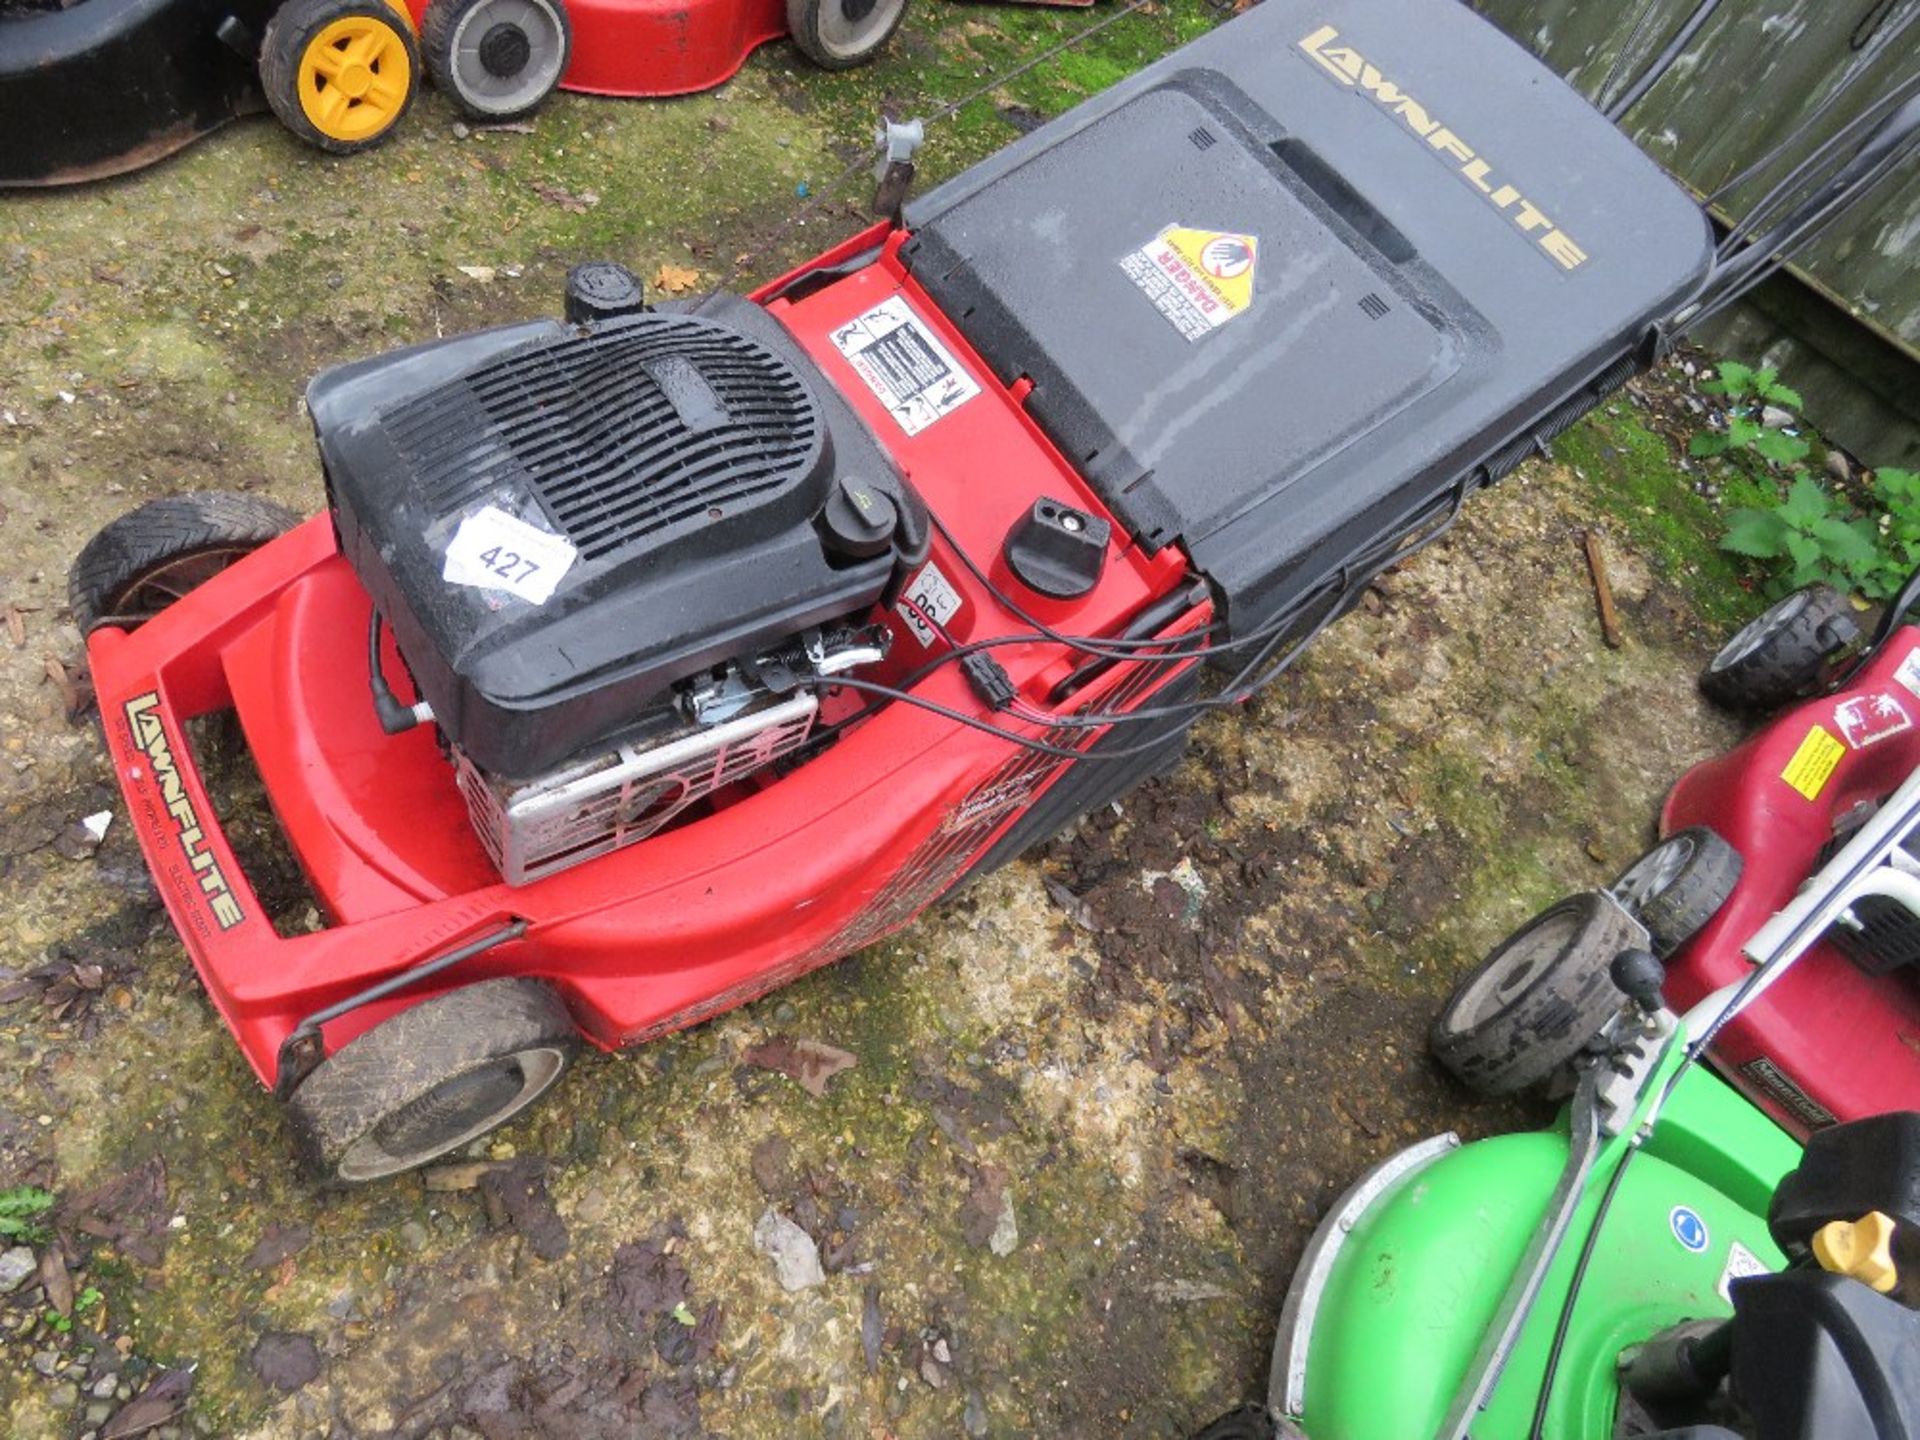 LAWNFLITE ROLLER PETROL ENGINED ROTARY LAWNMOWER. WITH COLLECTOR. THIS LOT IS SOLD UNDER THE AUC